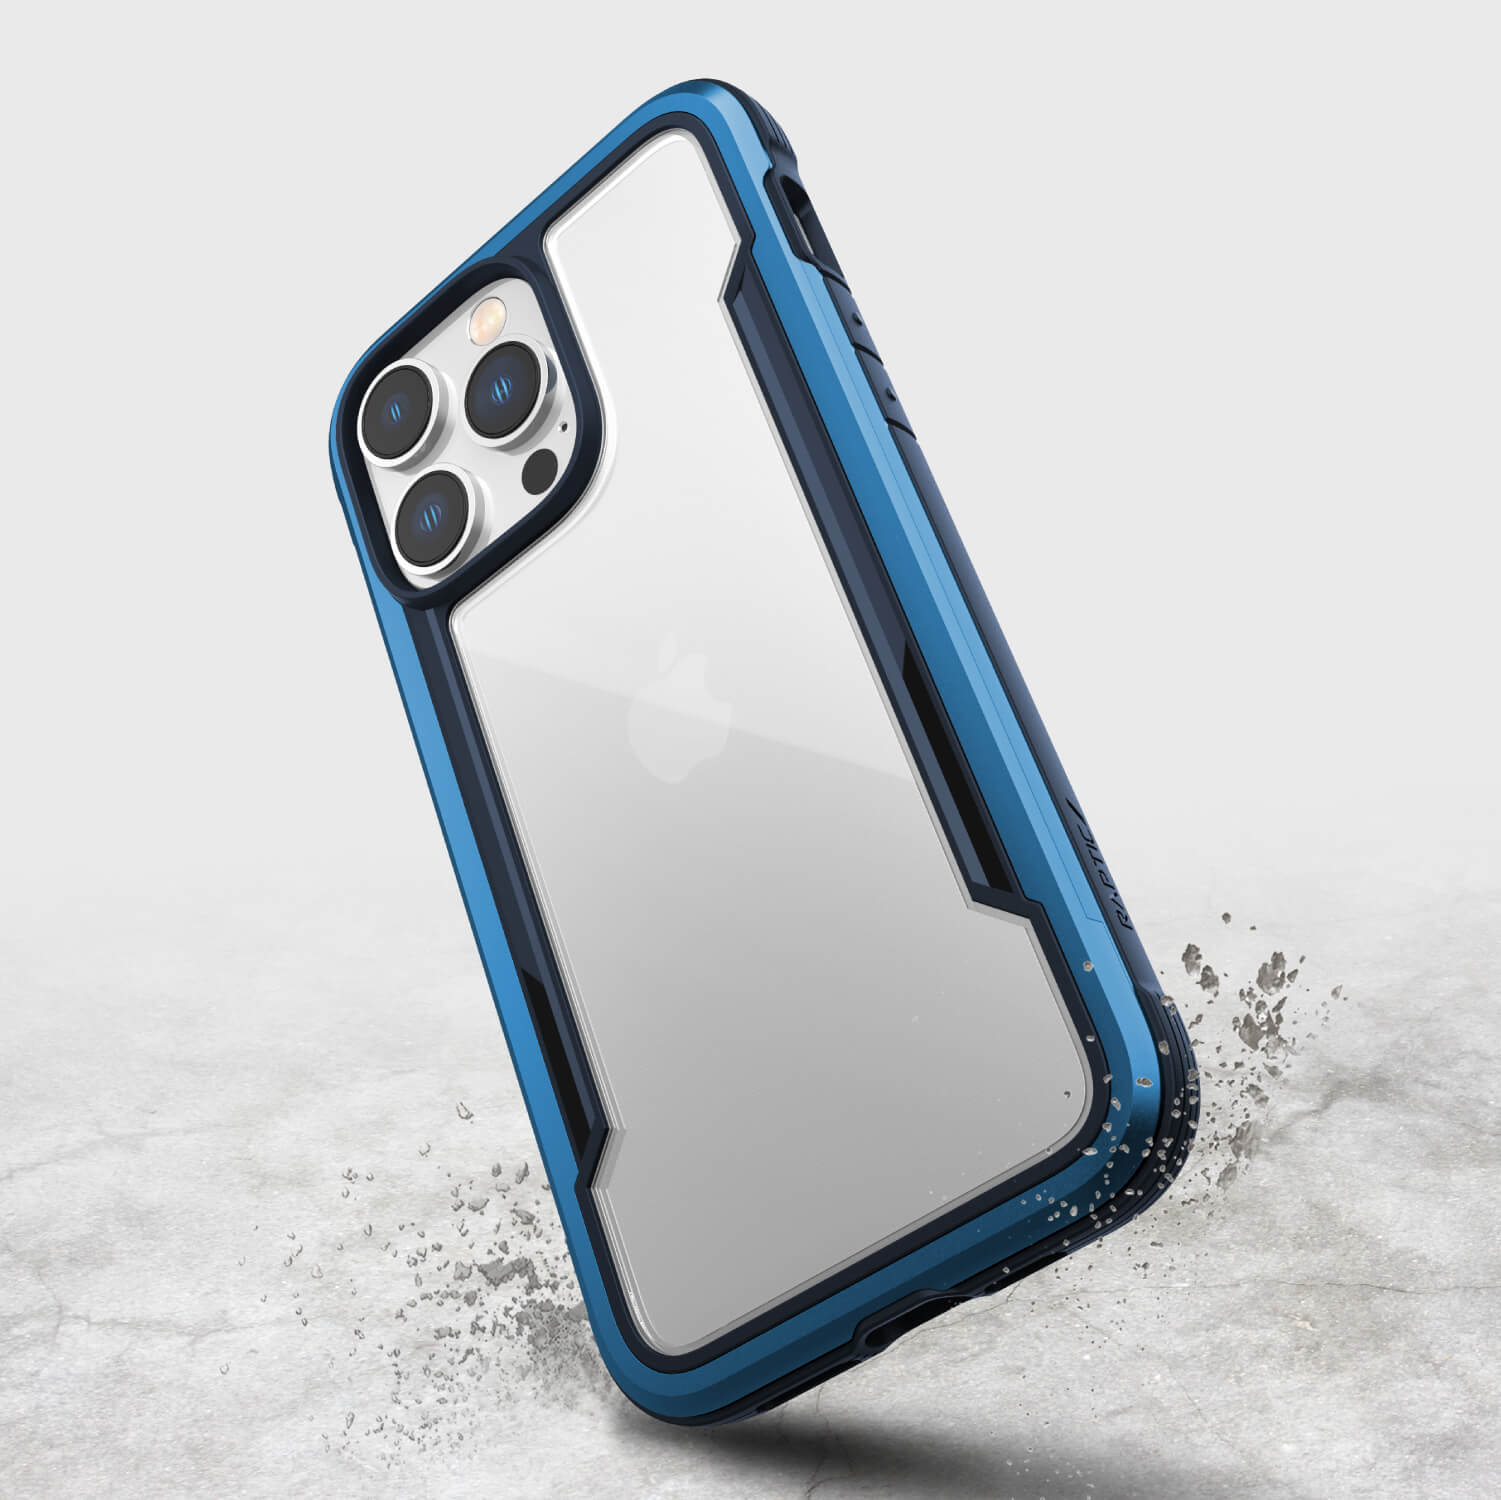 The iPhone 14/15 Pro Max Case - Shield, by Raptic, is shown in blue.